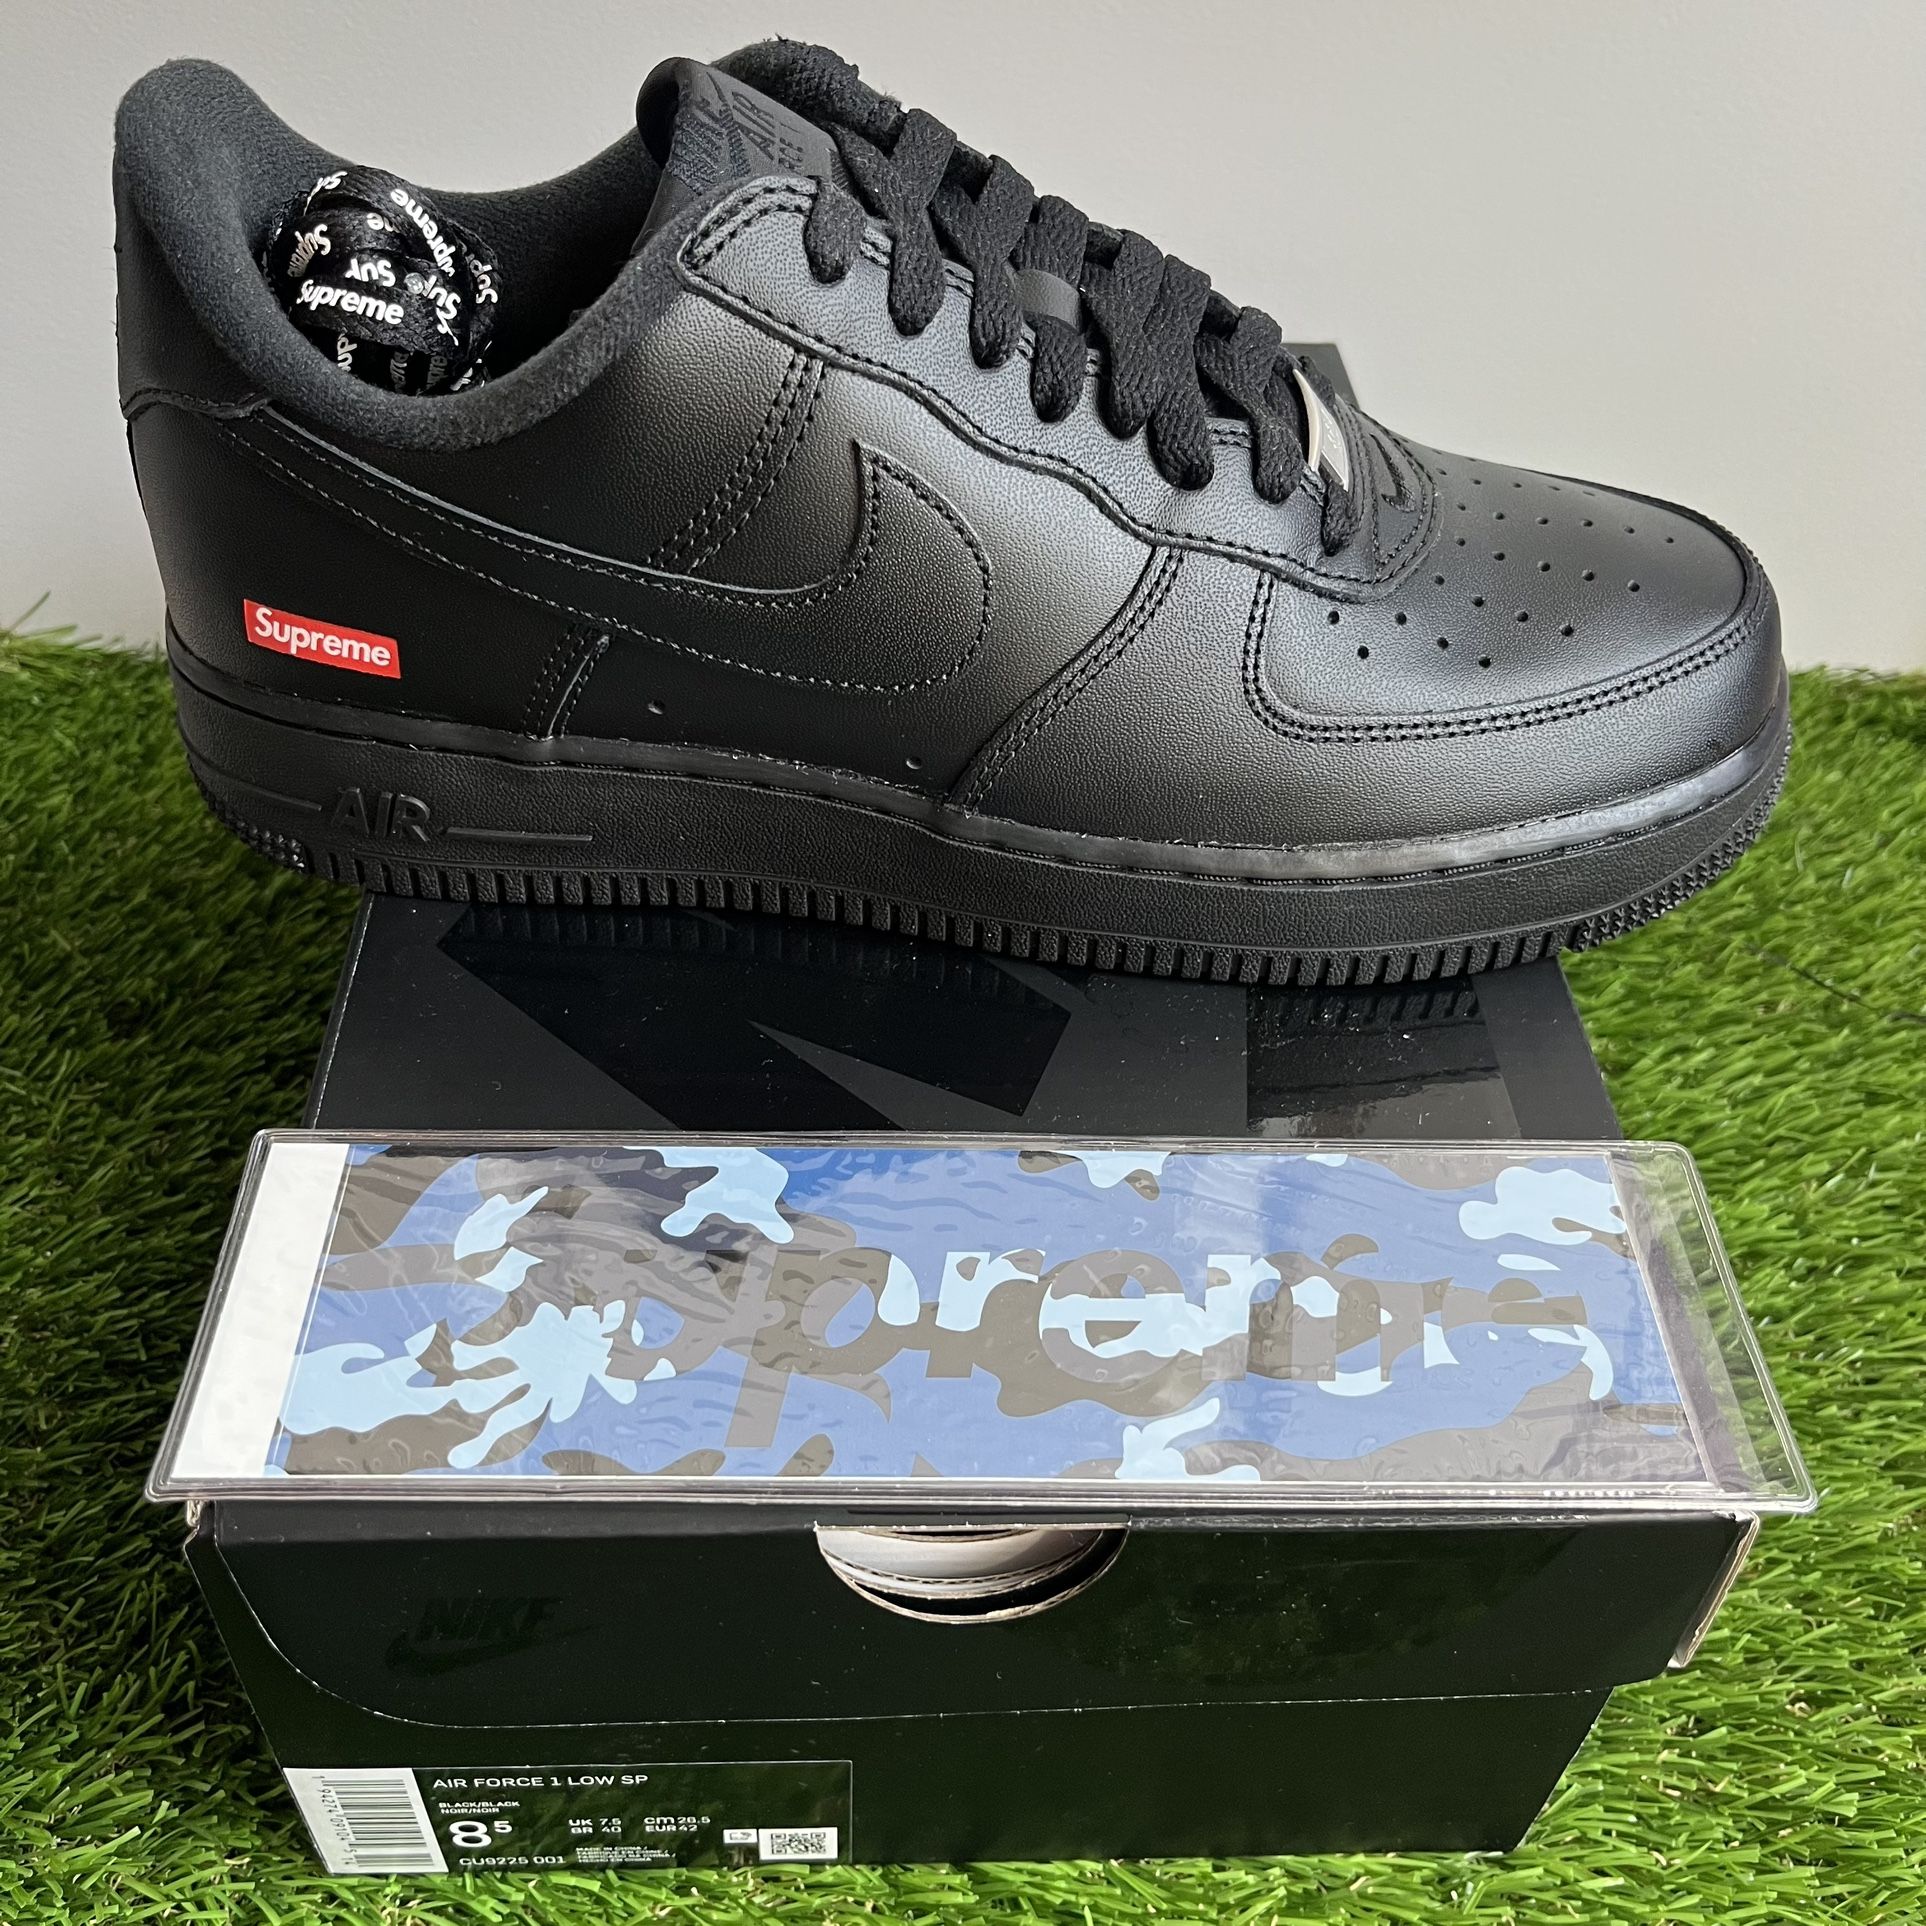 Nike x Supreme AF1 Size 8.5 Shoes Sneakers Black Shoes Lowtop Lows Box Logo SP